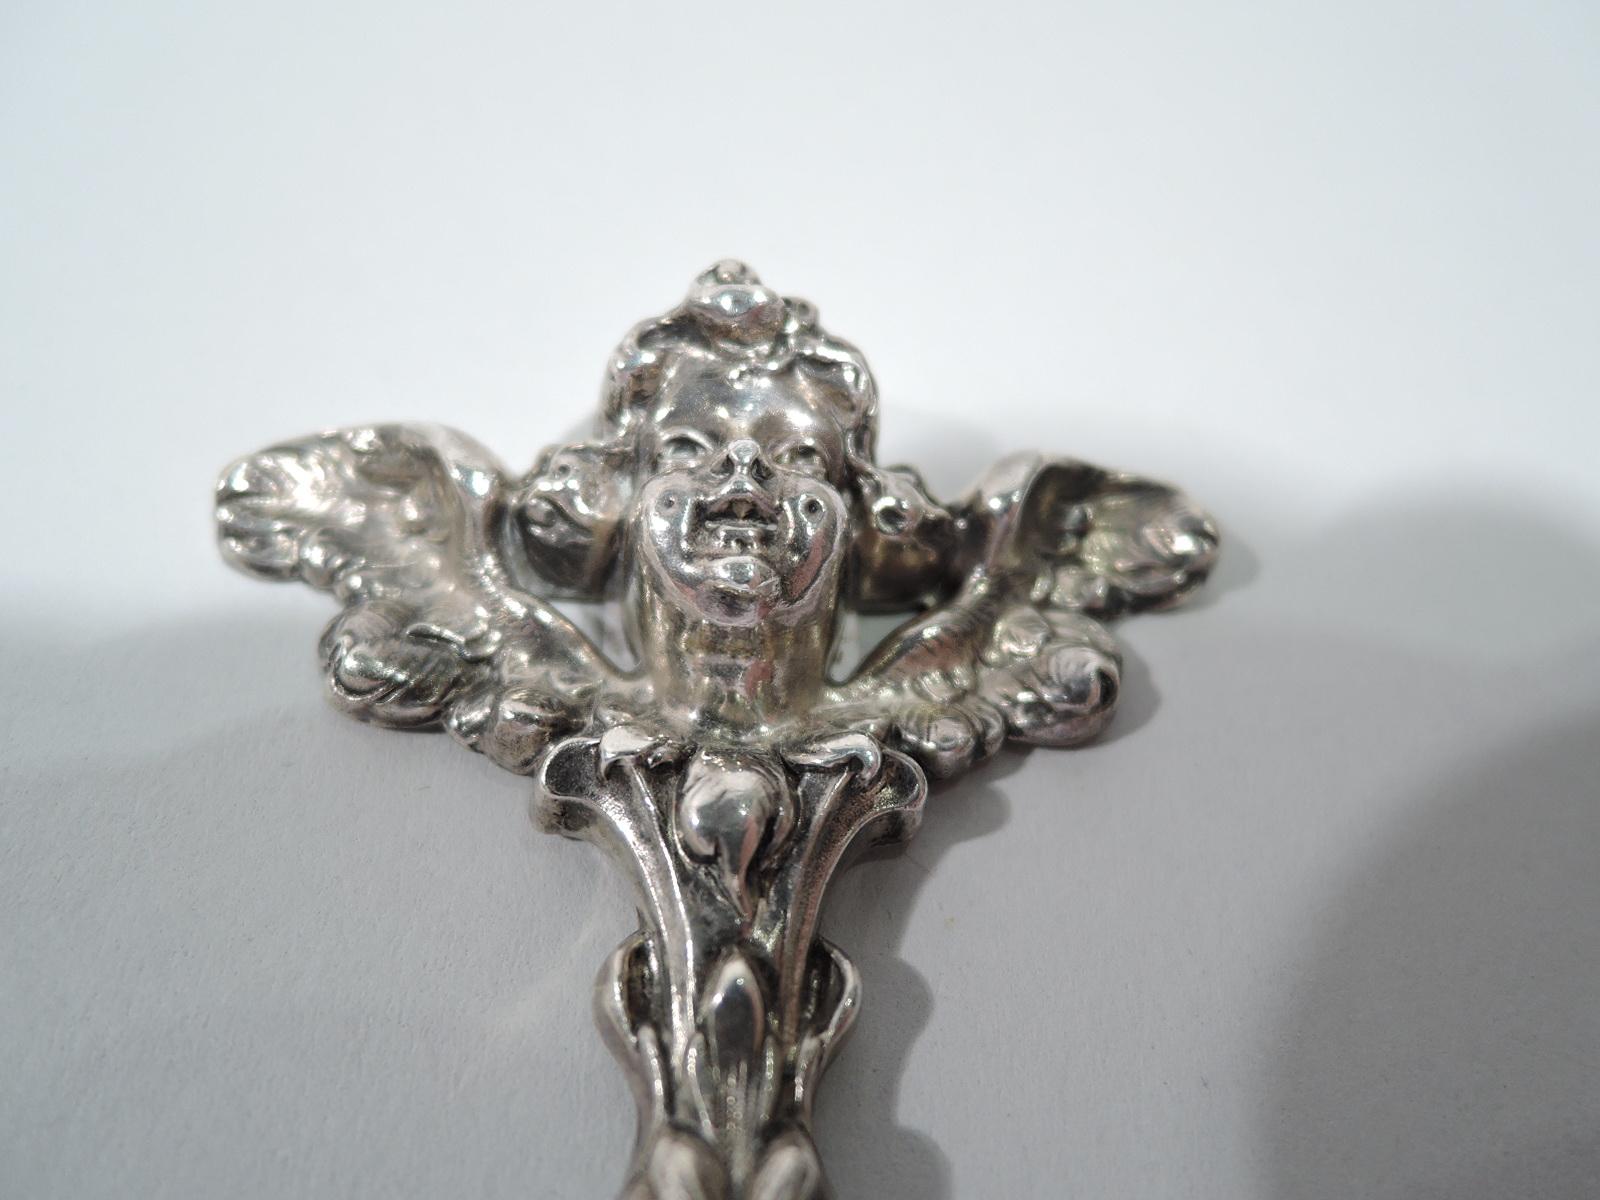 Turn of the century Art Nouveau sterling silver bookmark. Made by William B. Kerr in Newark. Dagger blade engraved with interlaced script monogram set in open frame. Cast terminal in form of winged cherub, a guiding spirit to help you keep your